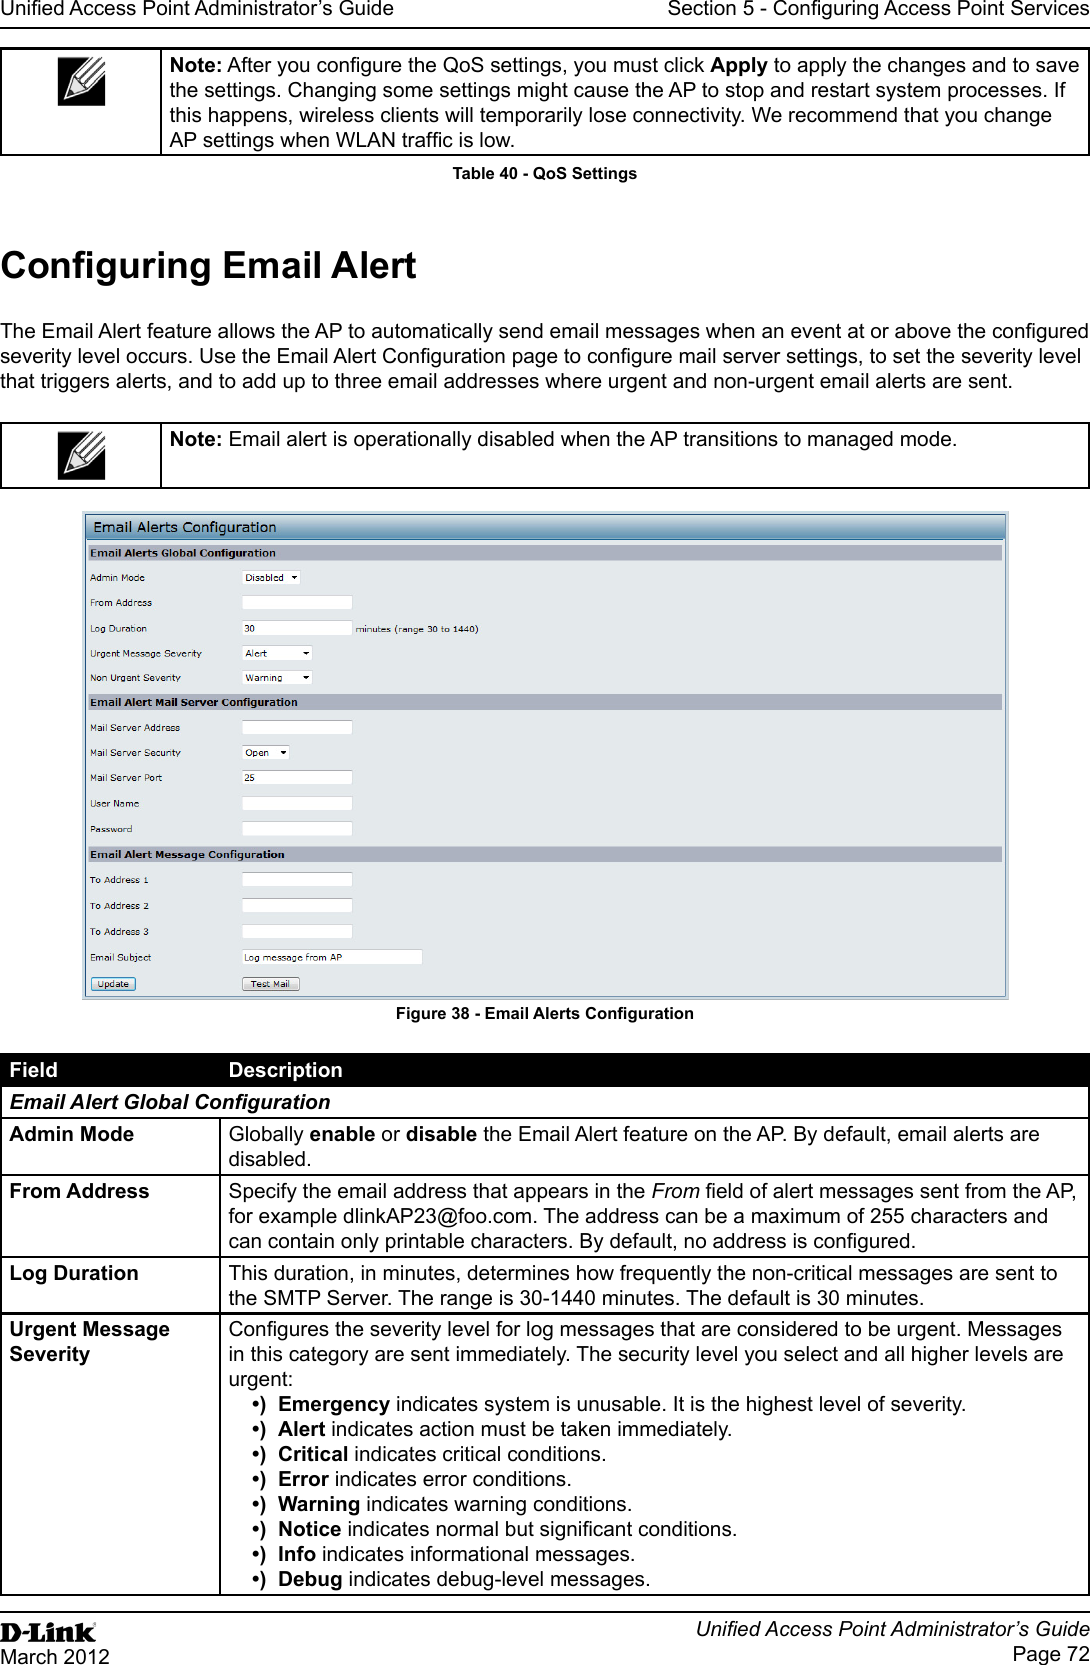 Unied Access Point Administrator’s GuideUnied Access Point Administrator’s GuidePage 72March 2012Section 5 - Conguring Access Point ServicesNote: After you congure the QoS settings, you must click Apply to apply the changes and to save the settings. Changing some settings might cause the AP to stop and restart system processes. If this happens, wireless clients will temporarily lose connectivity. We recommend that you change AP settings when WLAN trafc is low. Table 40 - QoS SettingsConguring Email AlertThe Email Alert feature allows the AP to automatically send email messages when an event at or above the congured severity level occurs. Use the Email Alert Conguration page to congure mail server settings, to set the severity level that triggers alerts, and to add up to three email addresses where urgent and non-urgent email alerts are sent.Note: Email alert is operationally disabled when the AP transitions to managed mode.Figure 38 - Email Alerts CongurationField DescriptionEmail Alert Global CongurationAdmin Mode Globally enable or disable the Email Alert feature on the AP. By default, email alerts are disabled.From Address Specify the email address that appears in the From eld of alert messages sent from the AP, for example dlinkAP23@foo.com. The address can be a maximum of 255 characters and can contain only printable characters. By default, no address is congured.Log Duration This duration, in minutes, determines how frequently the non-critical messages are sent to the SMTP Server. The range is 30-1440 minutes. The default is 30 minutes.Urgent Message SeverityCongures the severity level for log messages that are considered to be urgent. Messages in this category are sent immediately. The security level you select and all higher levels are urgent:•)  Emergency indicates system is unusable. It is the highest level of severity.•)  Alert indicates action must be taken immediately.•)  Critical indicates critical conditions.•)  Error indicates error conditions.•)  Warning indicates warning conditions.•)  Notice indicates normal but signicant conditions.•)  Info indicates informational messages.•)  Debug indicates debug-level messages.